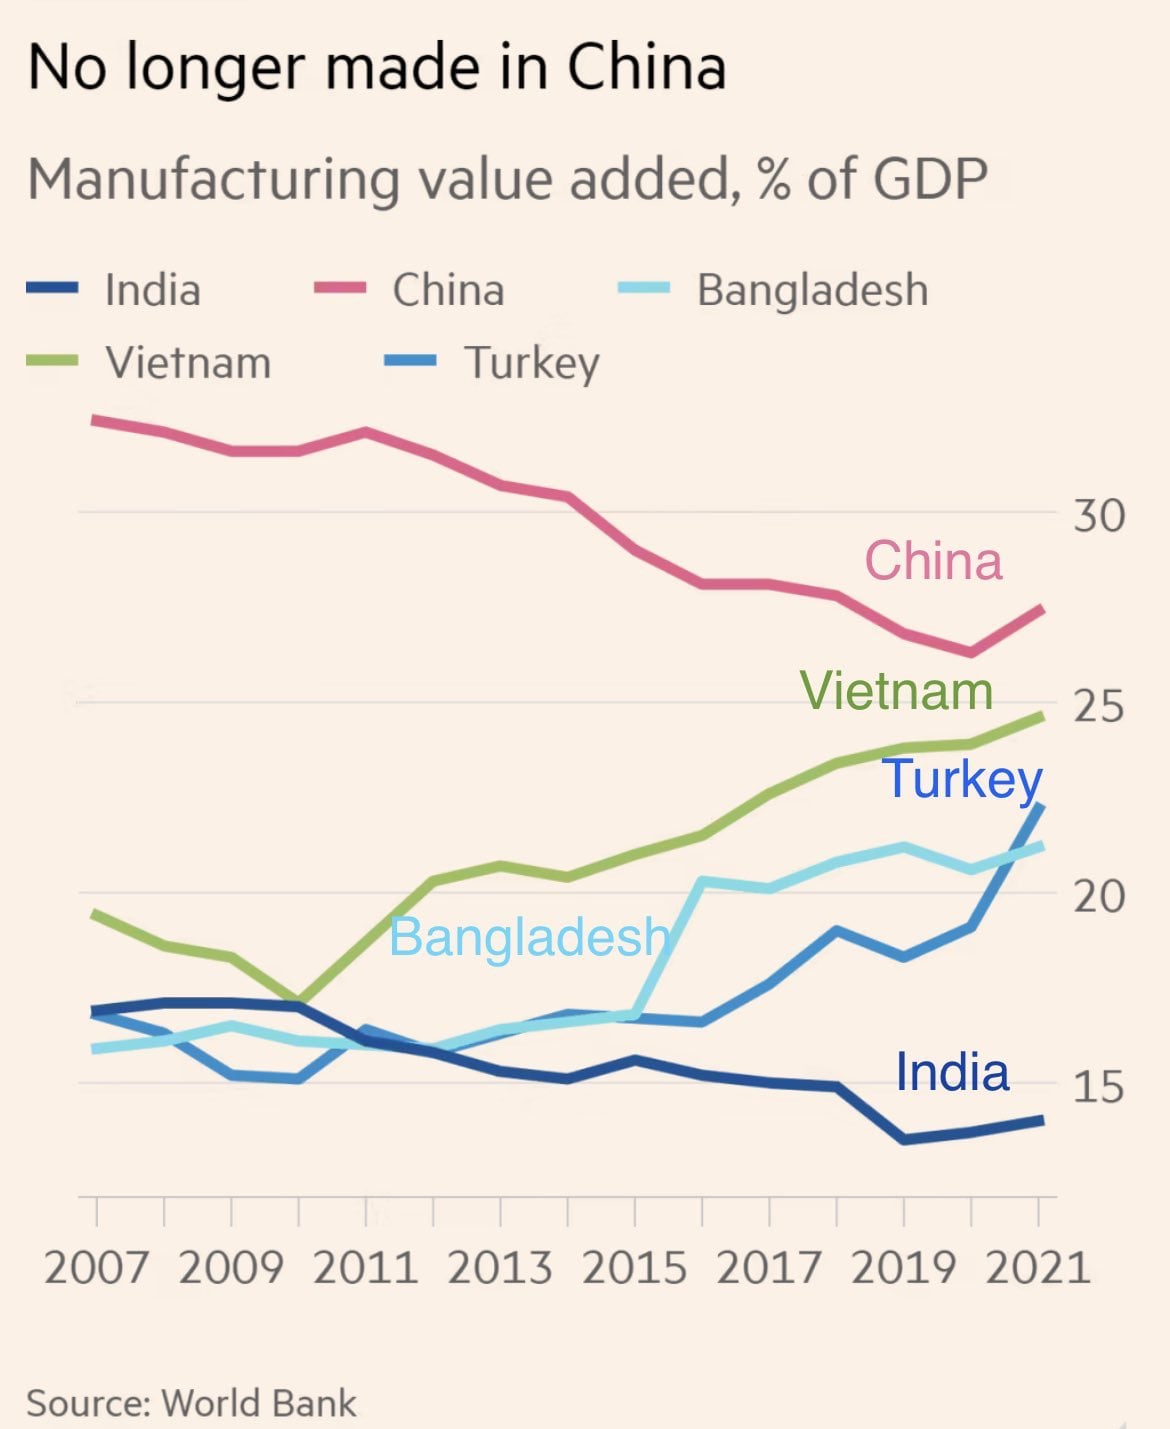 manufacturing-value-added-as-of-gdp-of-india-china-vietnam-v0-zmm7zfs1ihla1.jpg